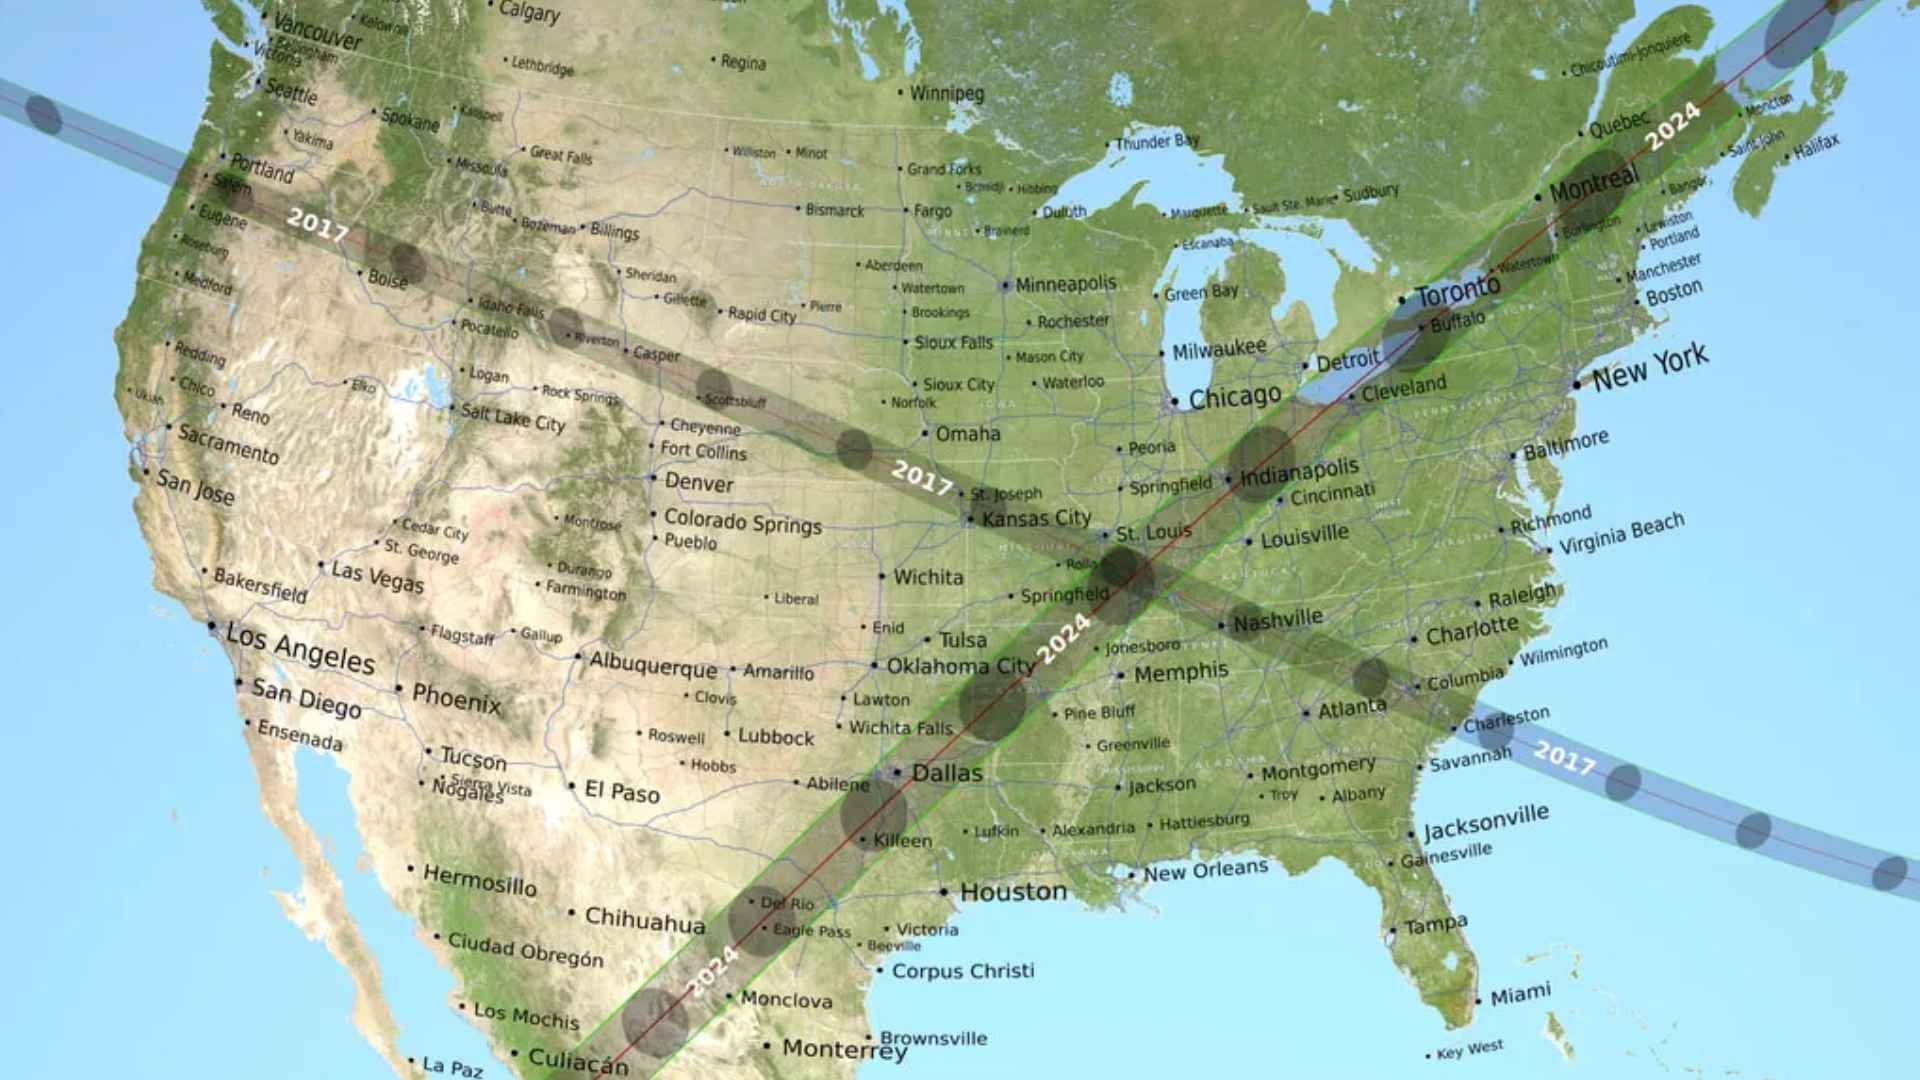 Solar Eclipse - 2017 and 2024 paths